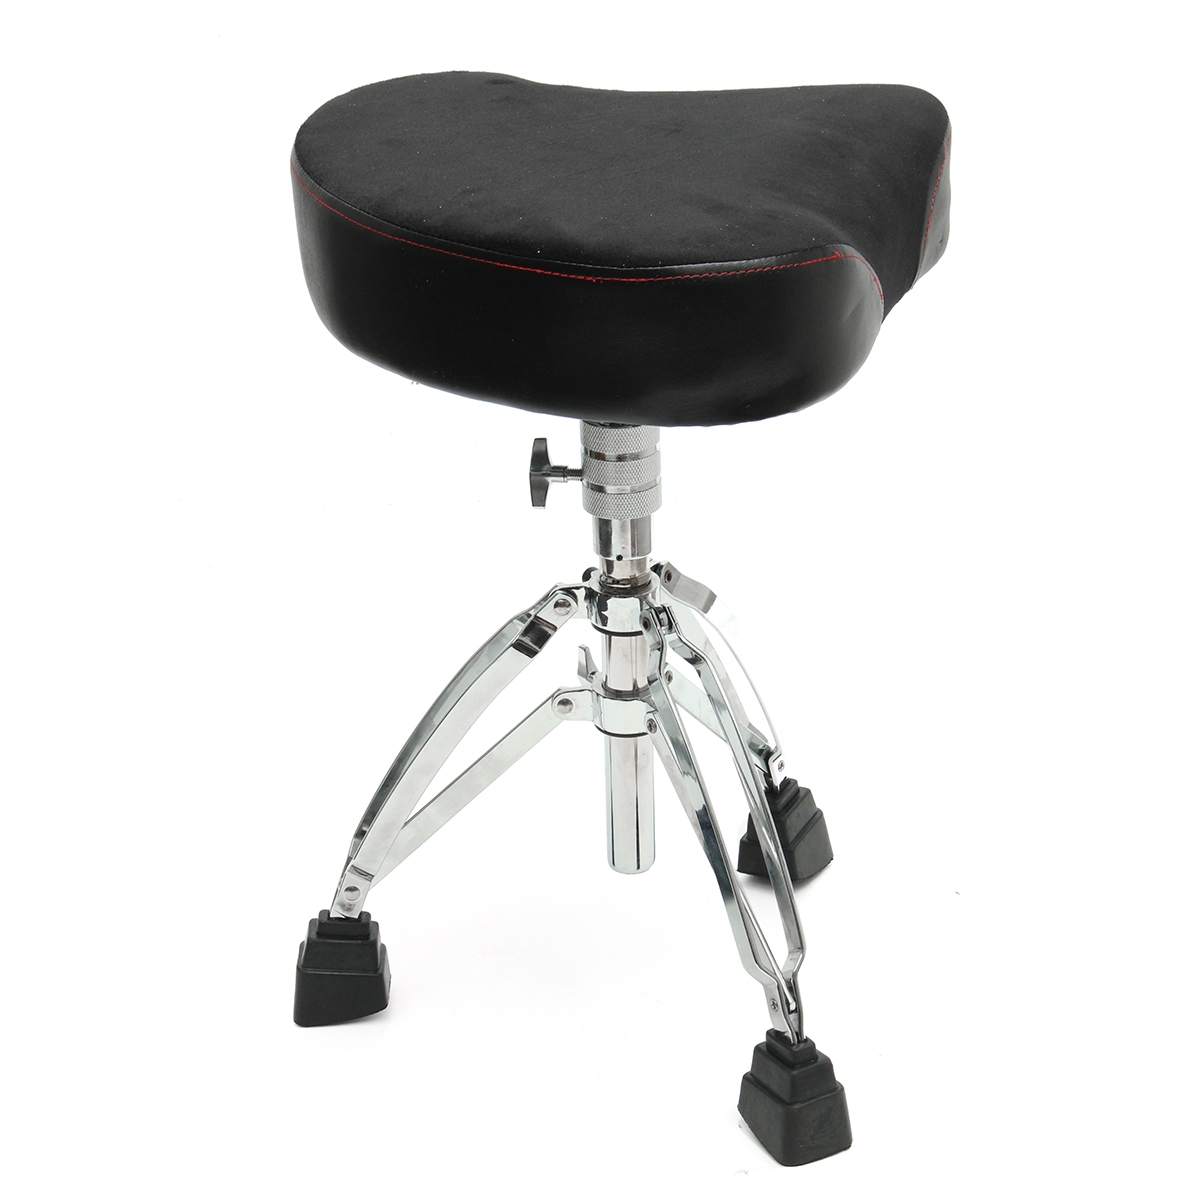 Yinyoute Z-220 Leather Suede Threaded Rod Drum Stool for Drummer